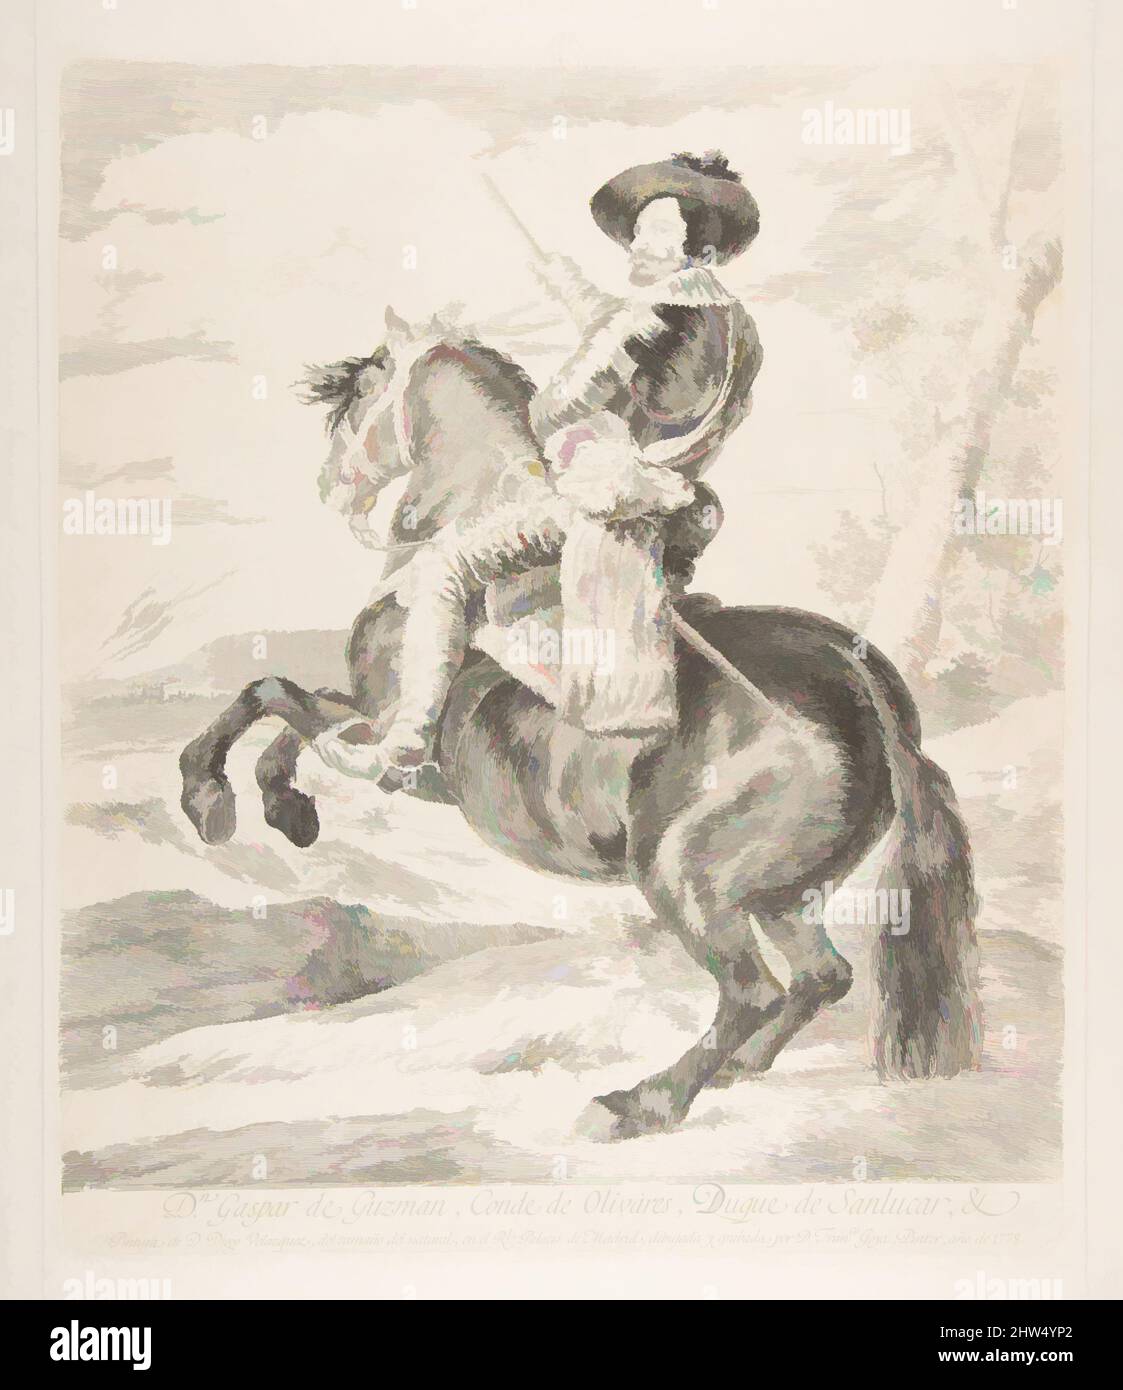 Art inspired by Gaspar de Guzman, Count of Olivares on horseback, after Velázquez, 1778, Etching and drypoint, Plate: 14 5/8 × 12 3/8 in. (37.2 × 31.4 cm), Prints, Goya (Francisco de Goya y Lucientes) (Spanish, Fuendetodos 1746–1828 Bordeaux), After Velázquez (Diego Rodríguez de Silva, Classic works modernized by Artotop with a splash of modernity. Shapes, color and value, eye-catching visual impact on art. Emotions through freedom of artworks in a contemporary way. A timeless message pursuing a wildly creative new direction. Artists turning to the digital medium and creating the Artotop NFT Stock Photo